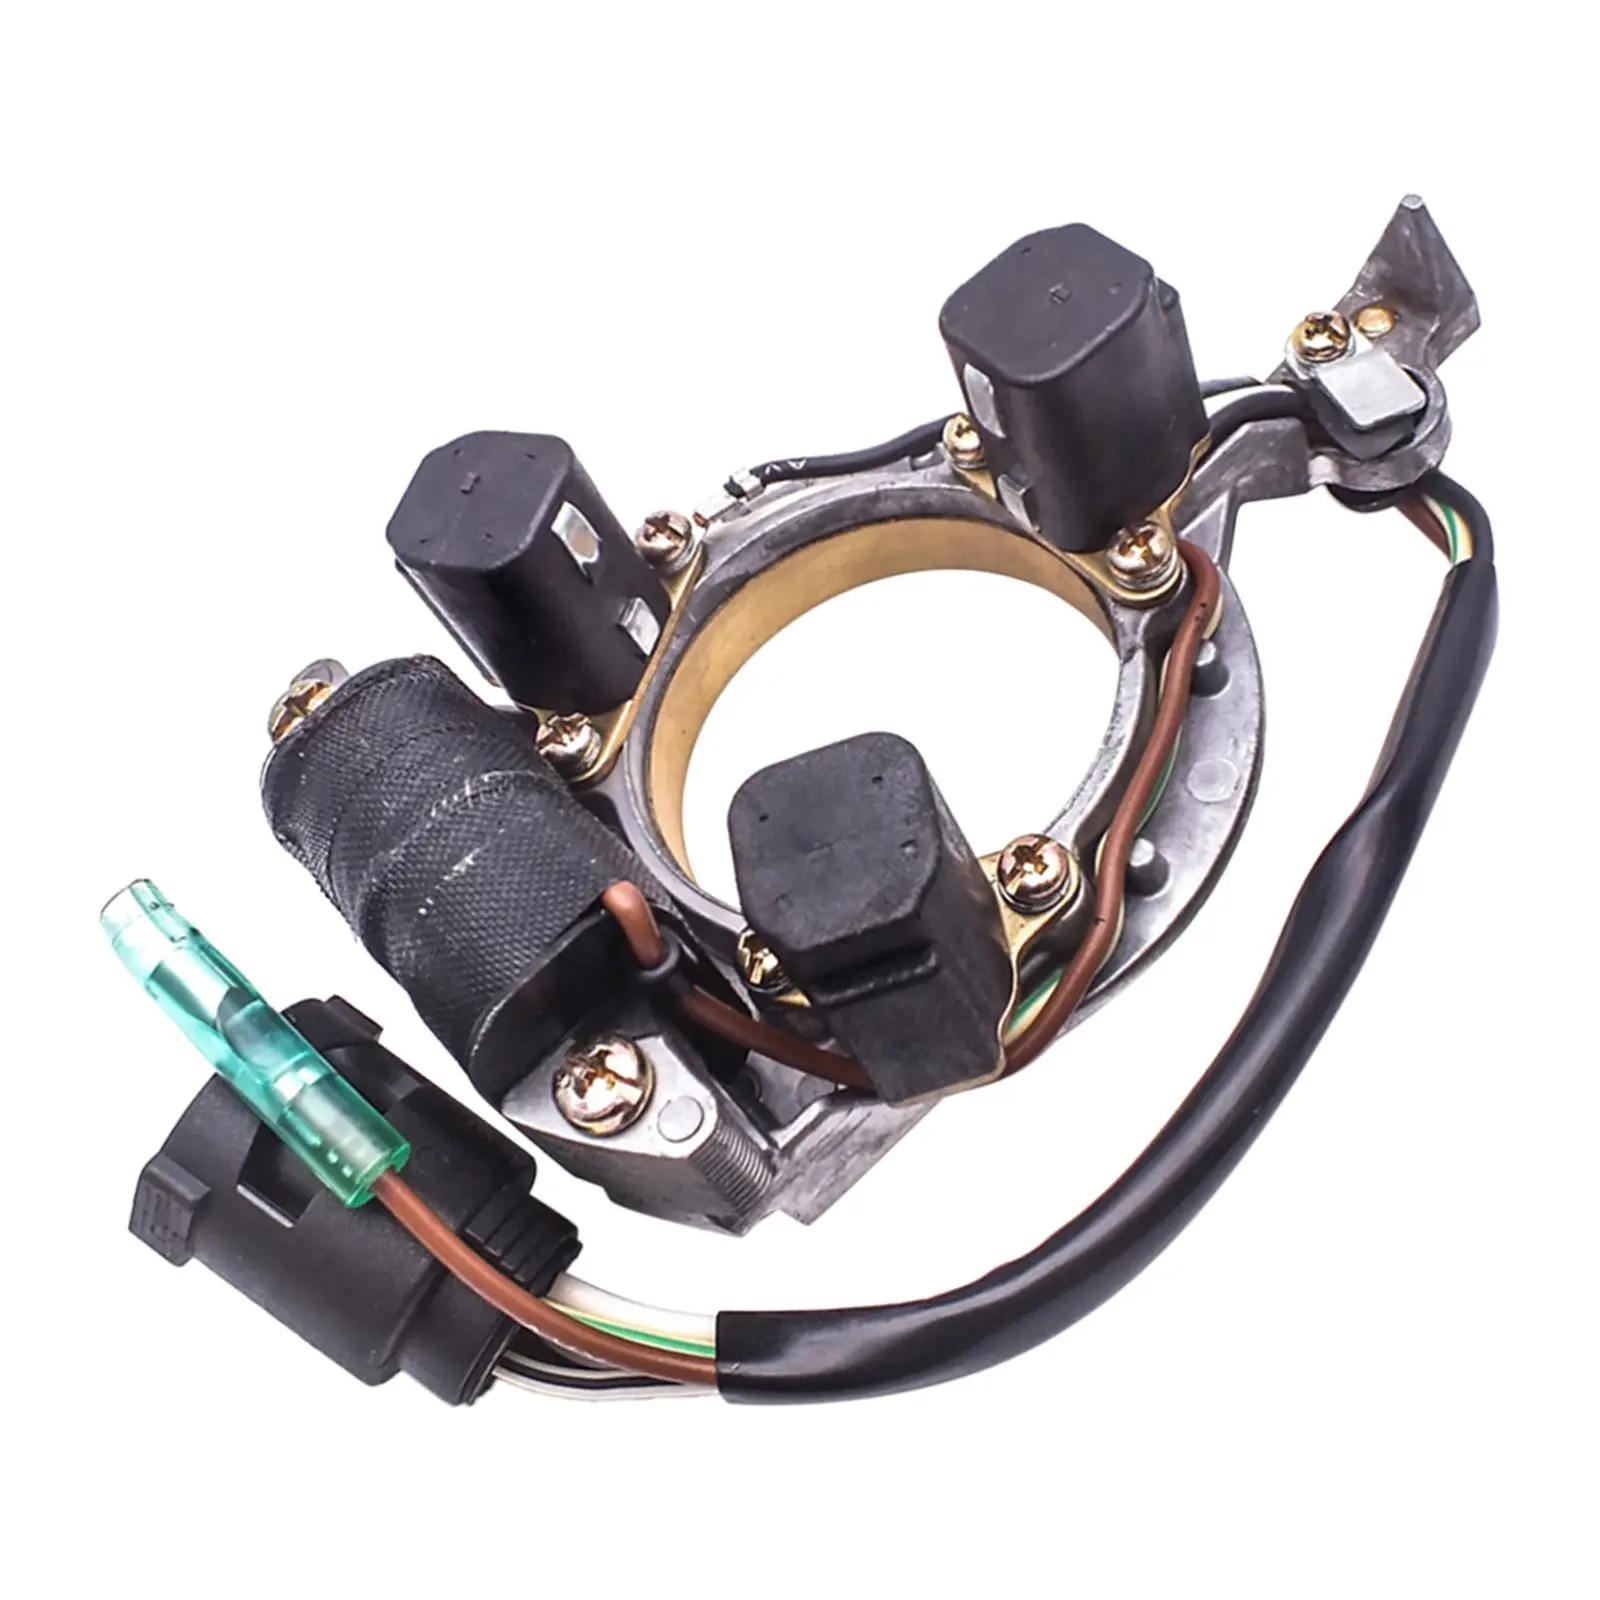 Boat Motor Stator Assy 6H3-85510-A1 for Yamaha Outboard Engine 60HP Professional Vehicle Repair Parts Easily Install